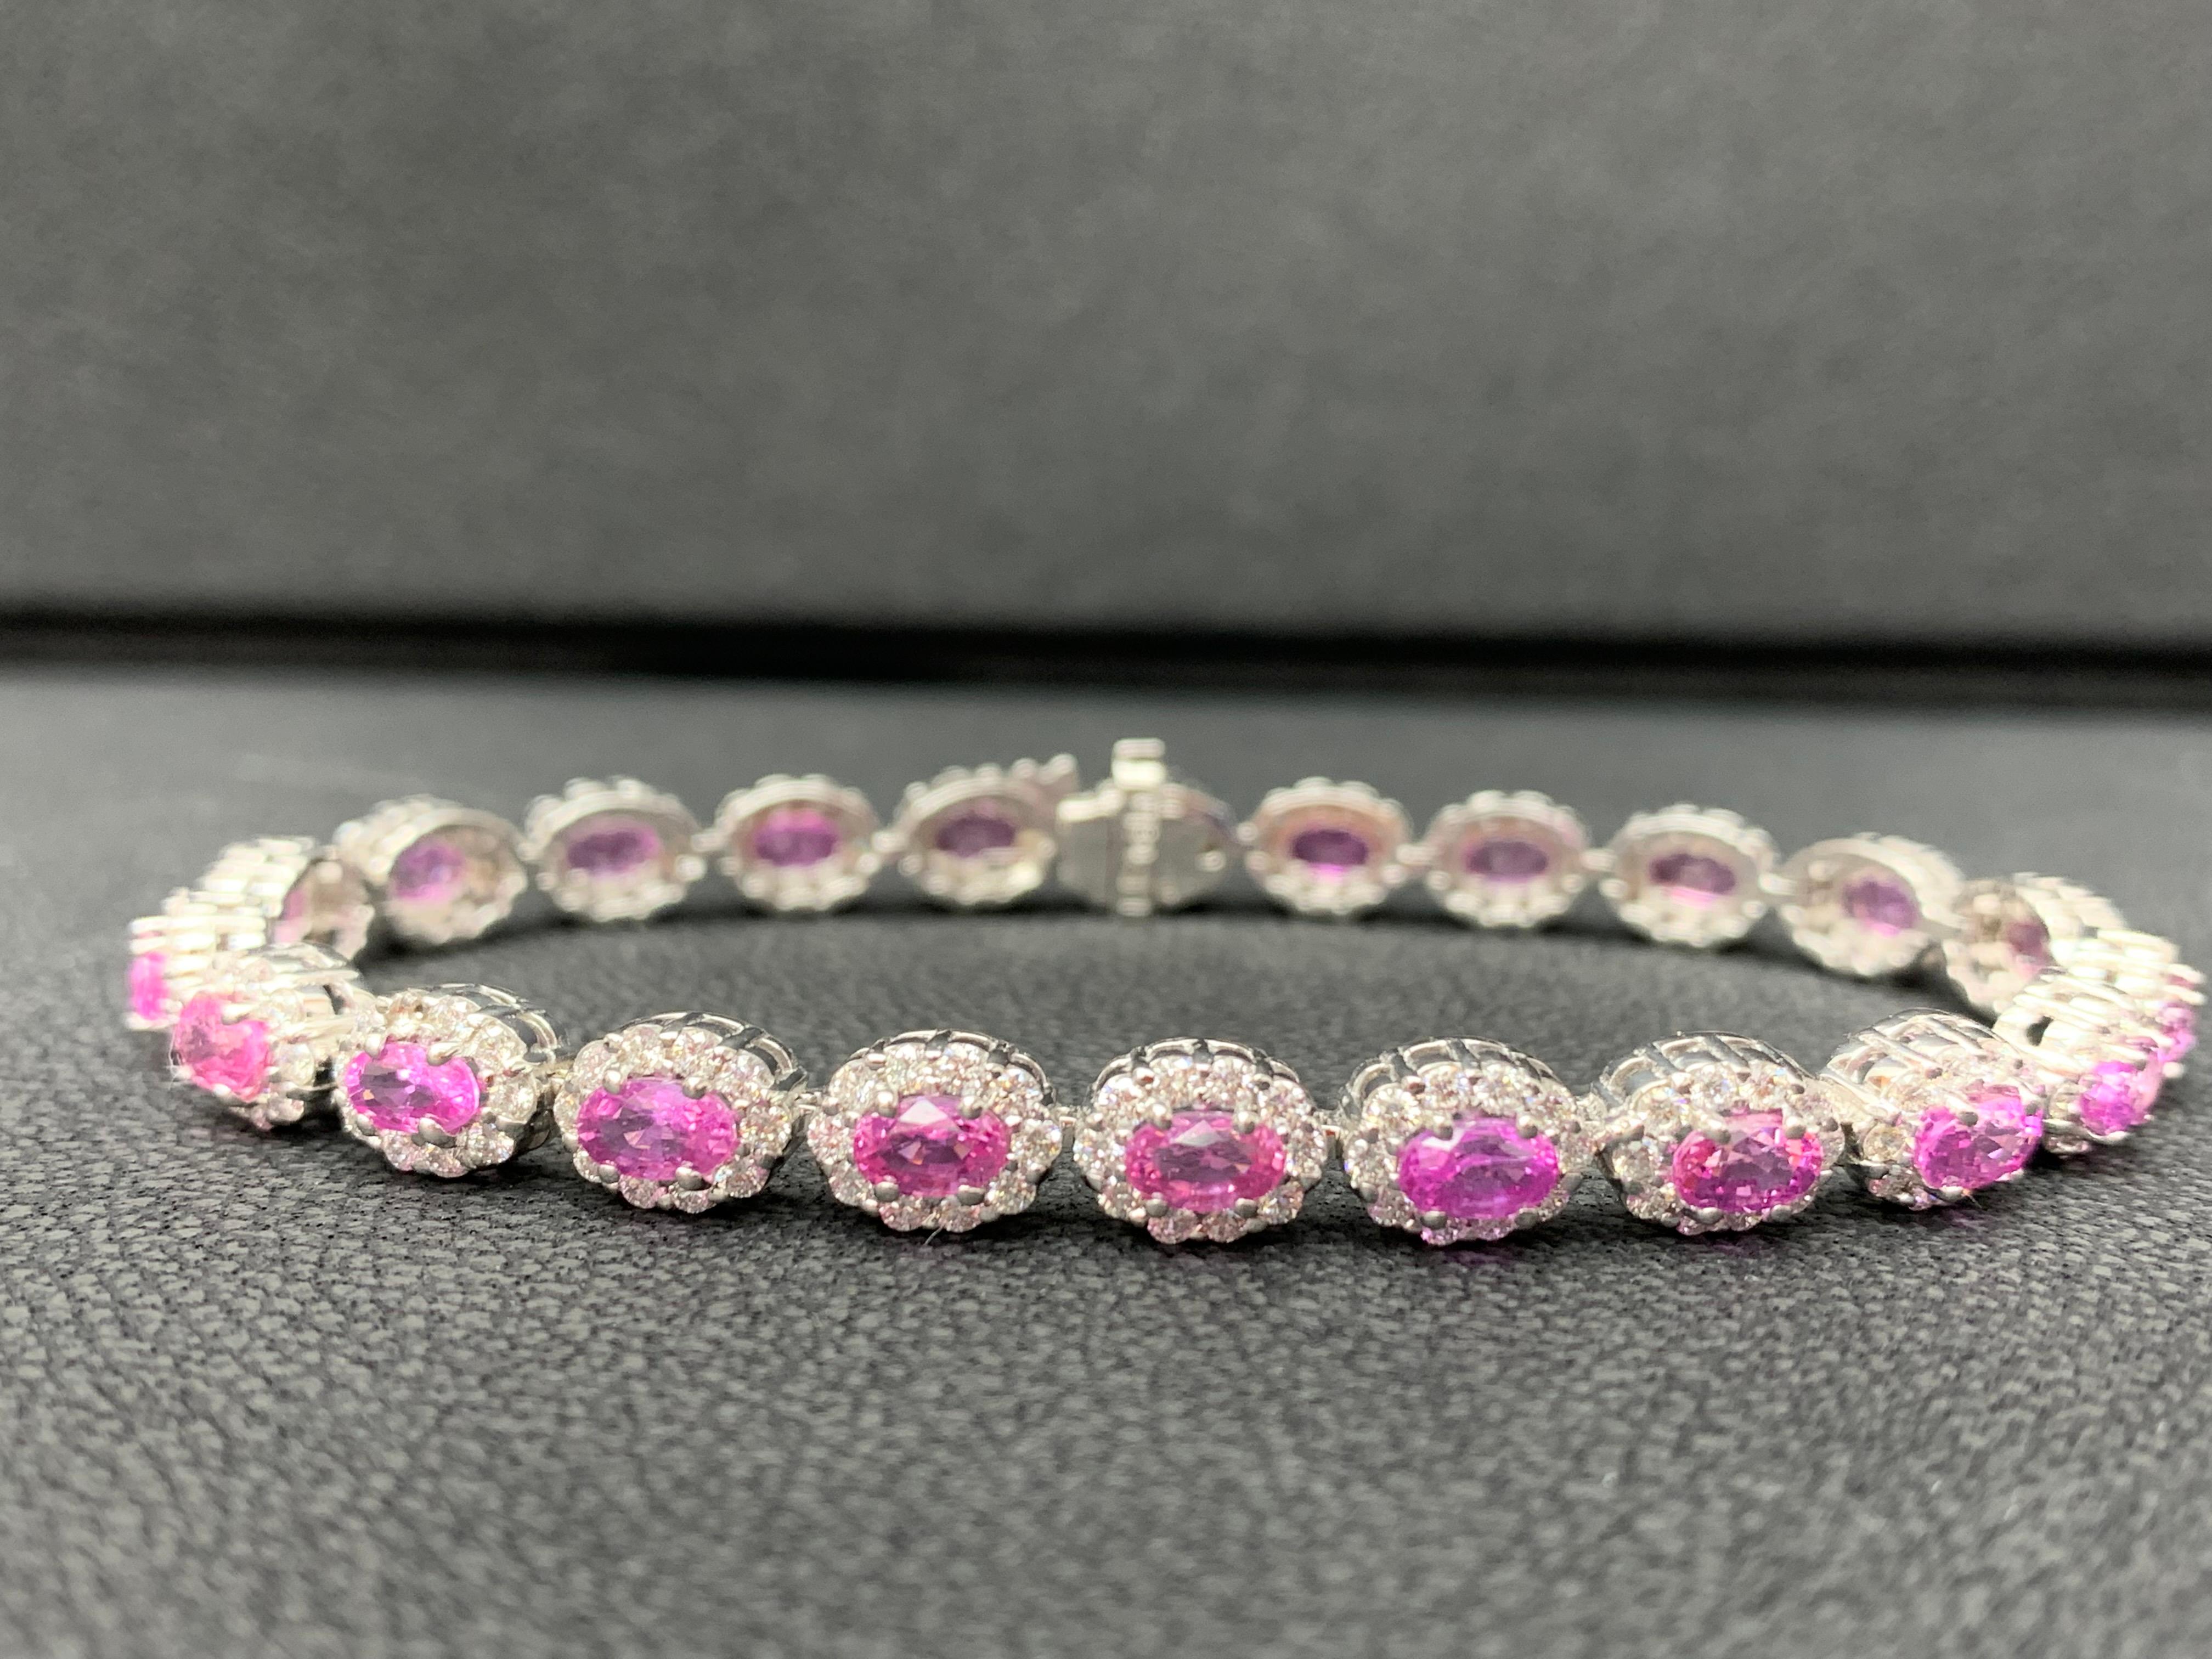 A beautiful pink sapphire and diamond bracelet showcasing color-rich pink sapphires, surrounded by a single row of brilliant round diamonds. 20 Oval cut pink sapphires weigh 7.21 carats total; accent diamonds weigh 3.30 carats total.

Style